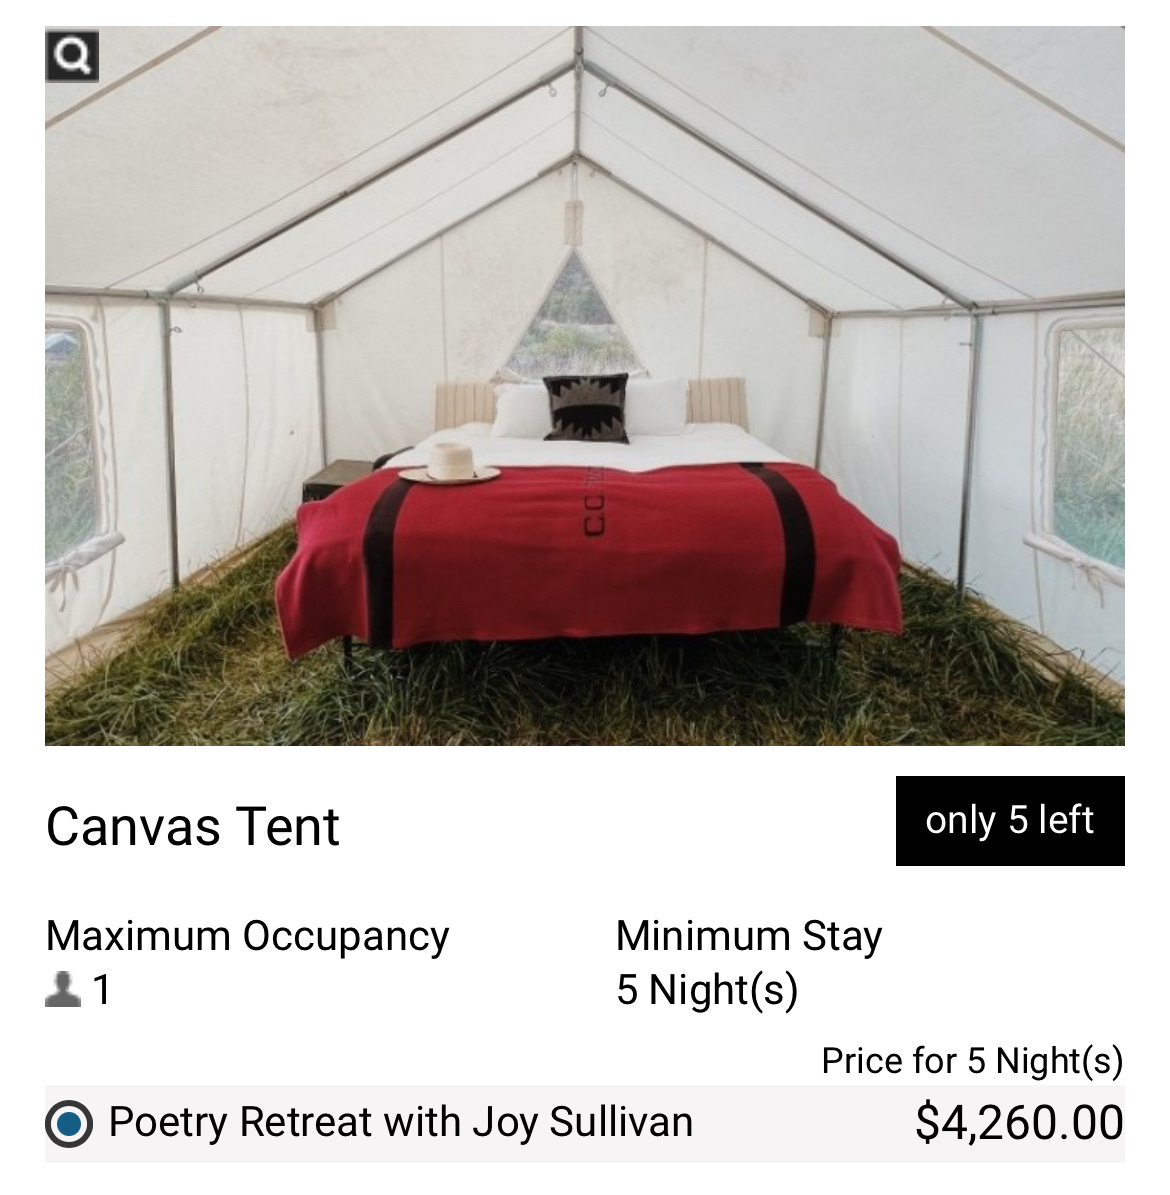 A screenshot of a booking page that shows Joy Sullivan's 5-night canvas tent retreat for $4,260.